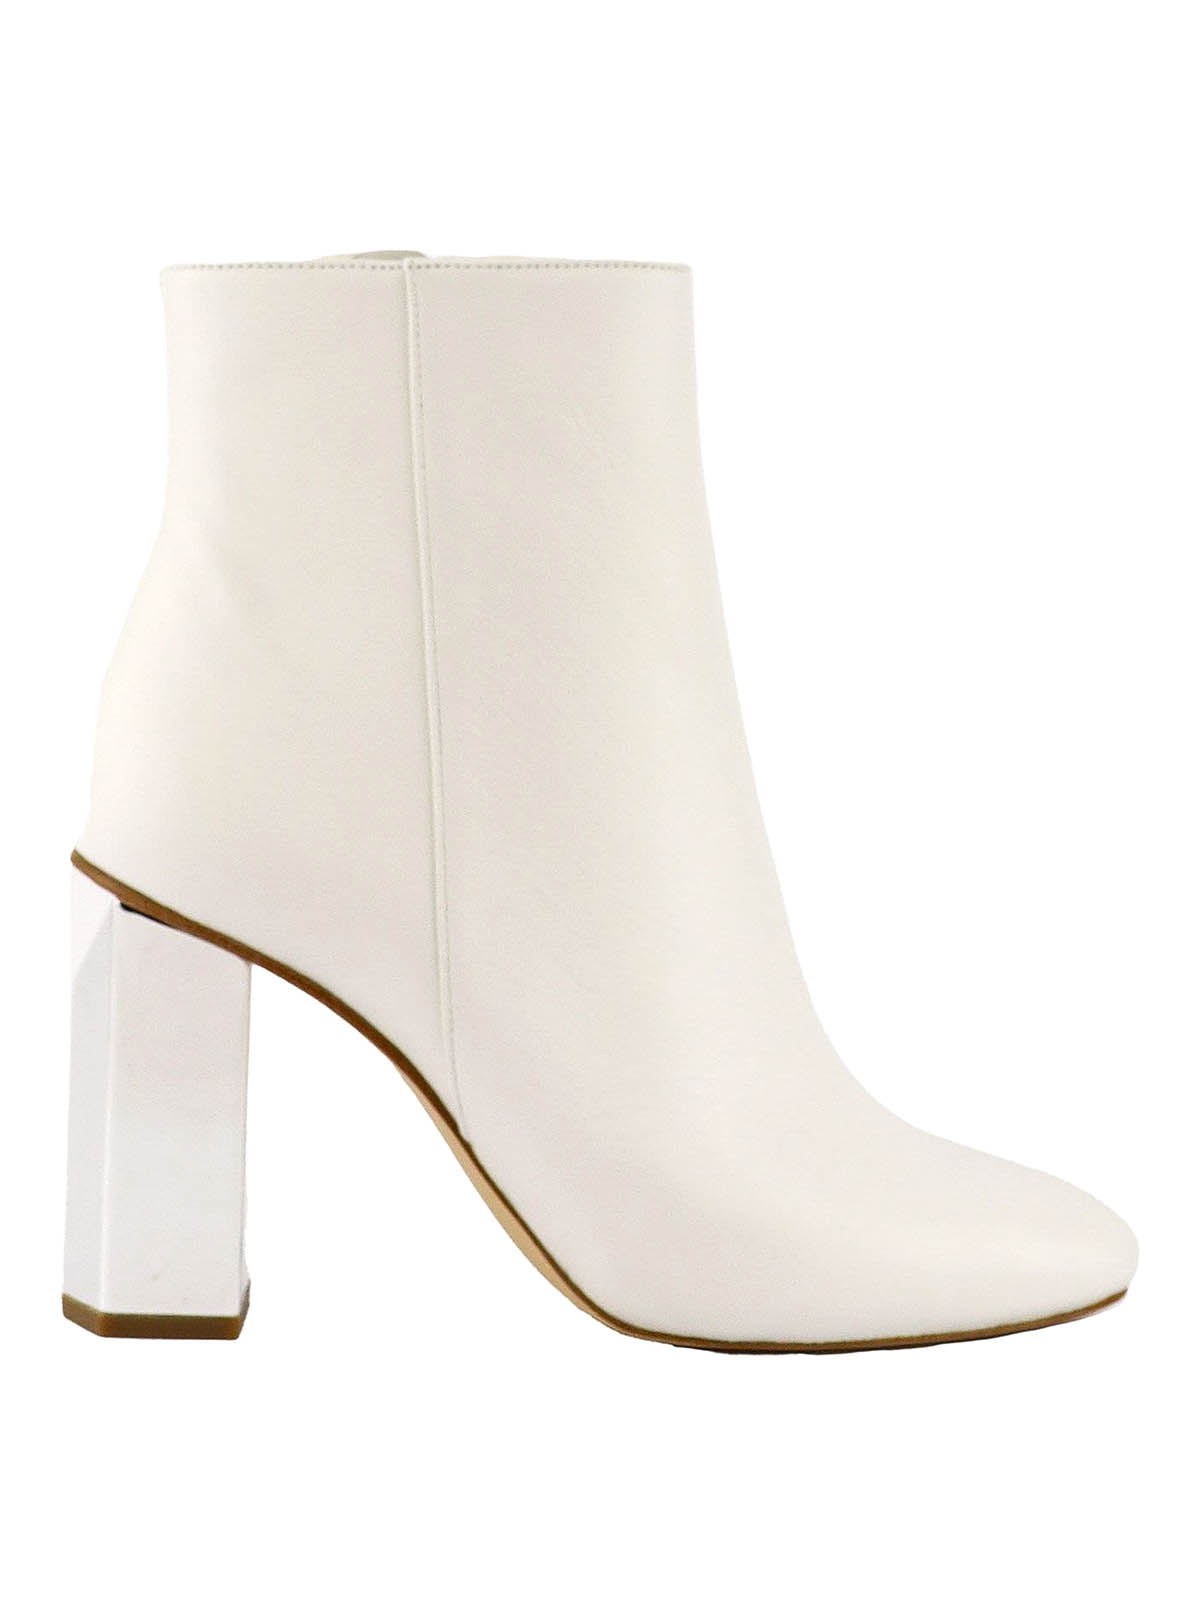 Michael Kors Petra Leather Ankle Boots 